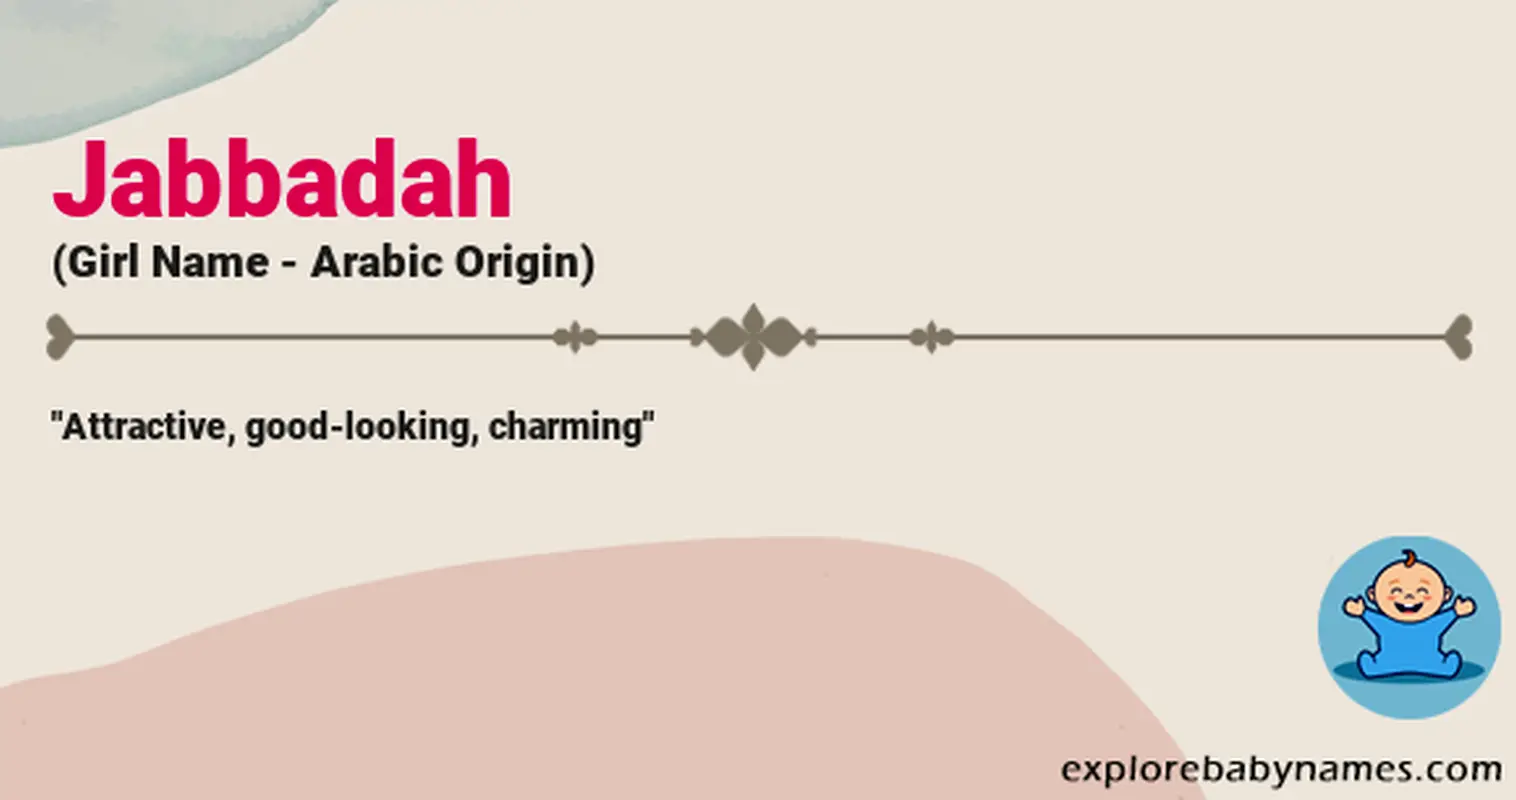 Meaning of Jabbadah